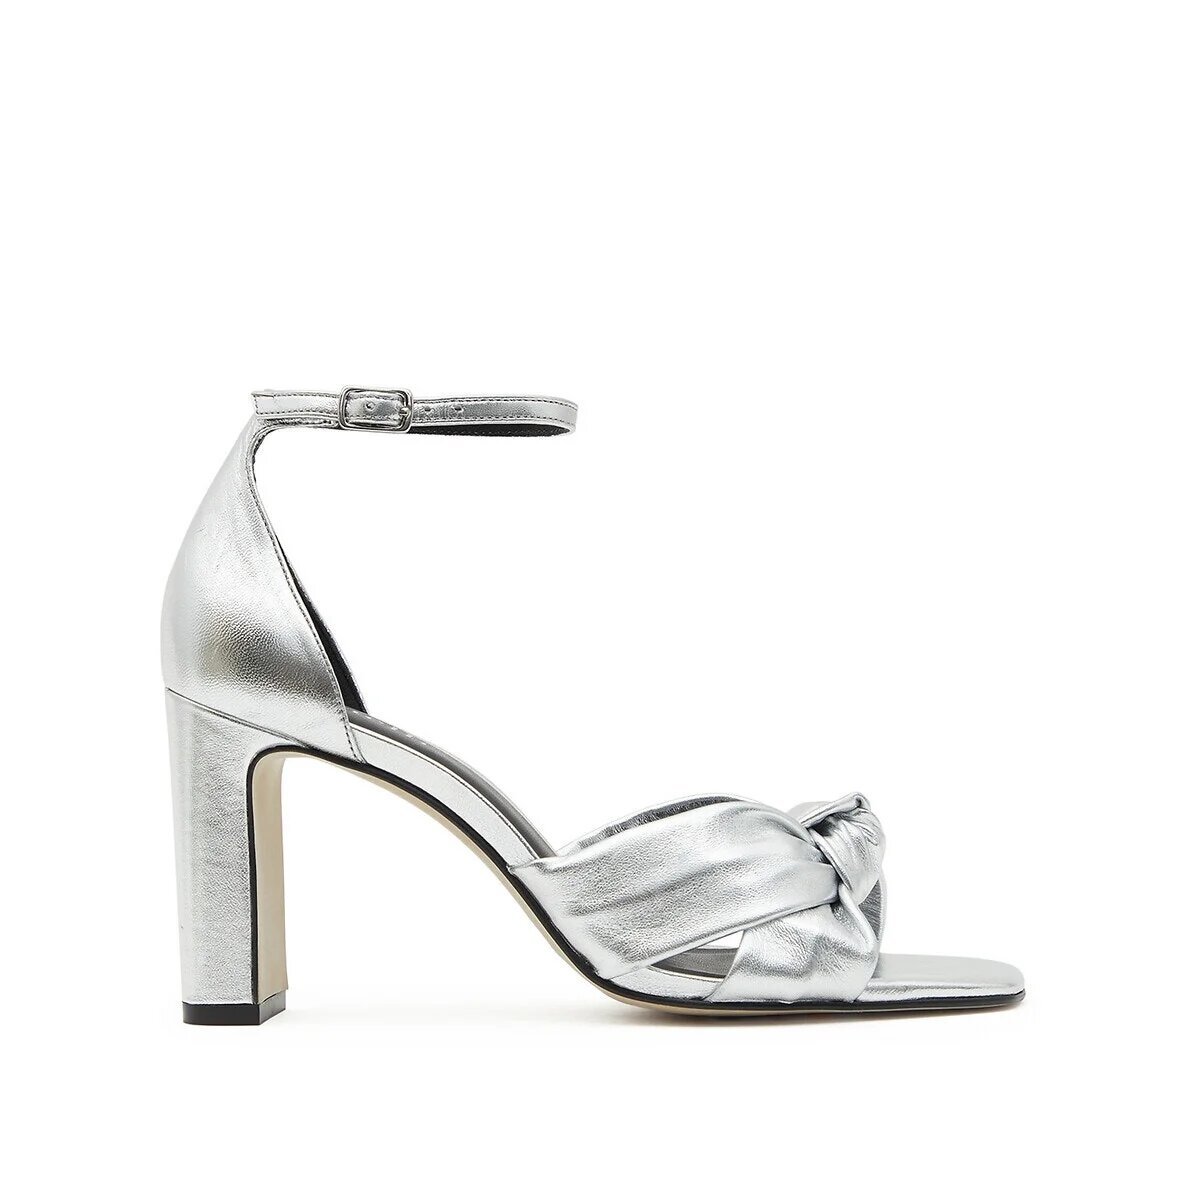 Silver square-heeled sandals by Minelli